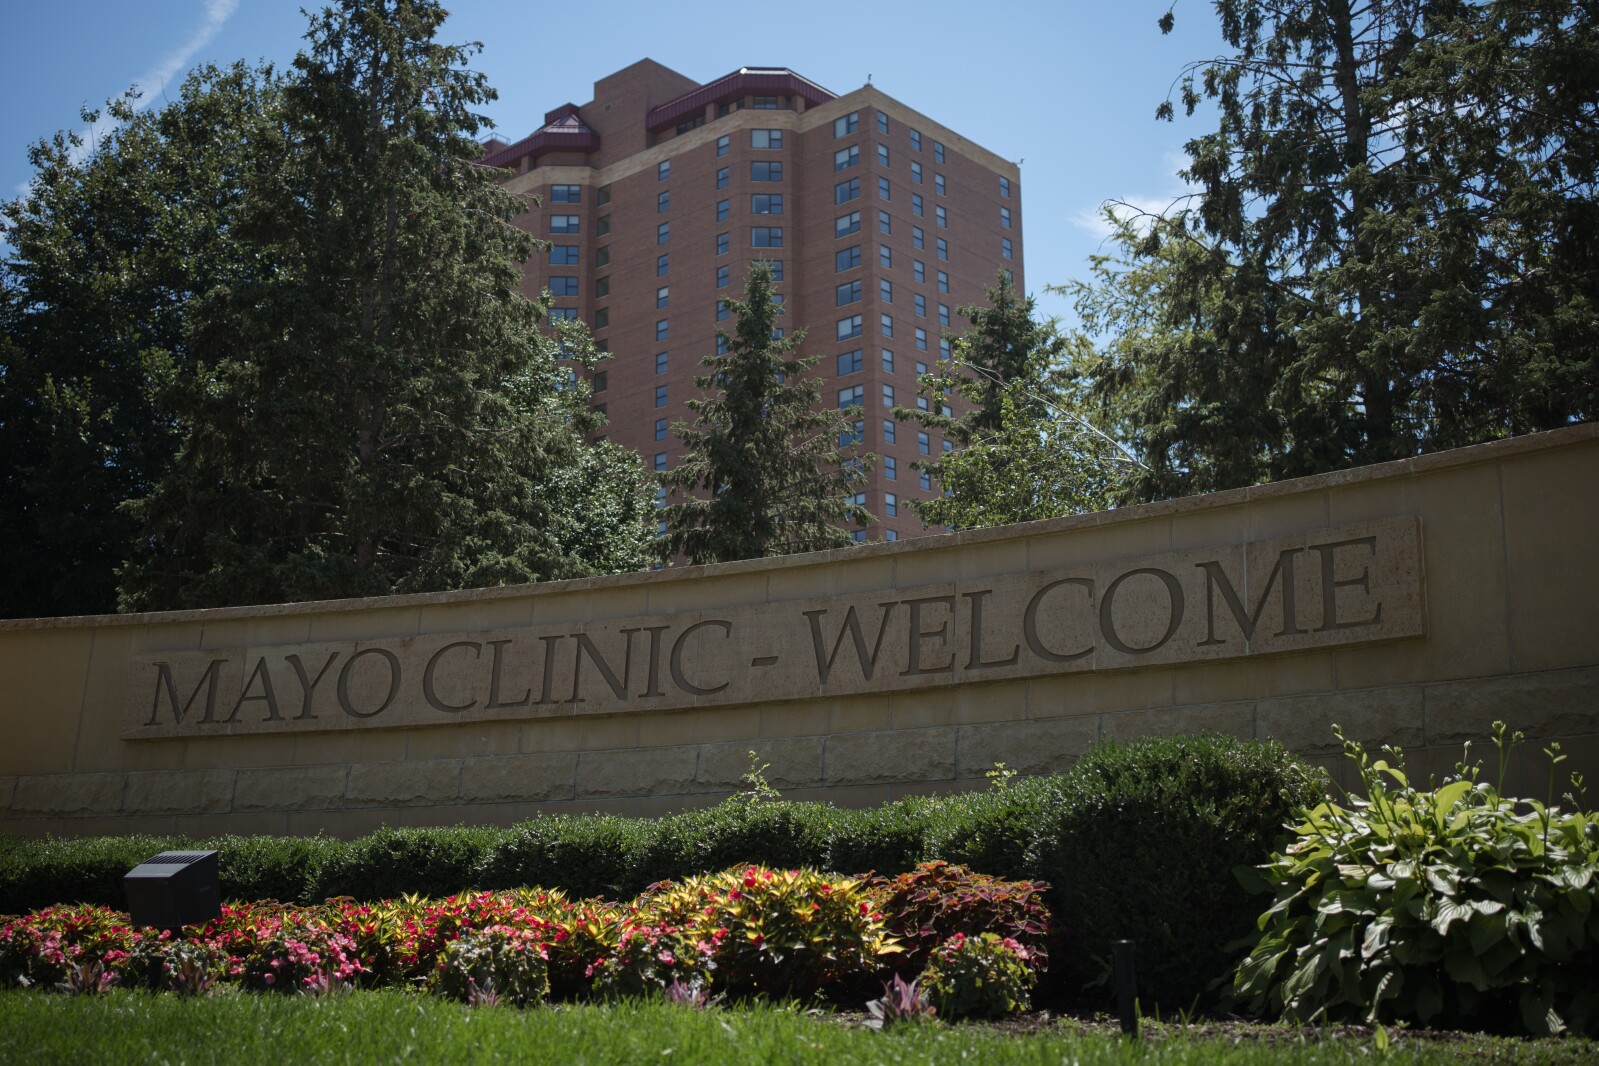 Mayo Clinic employee health insurance will cap coverage of weight-loss drugs